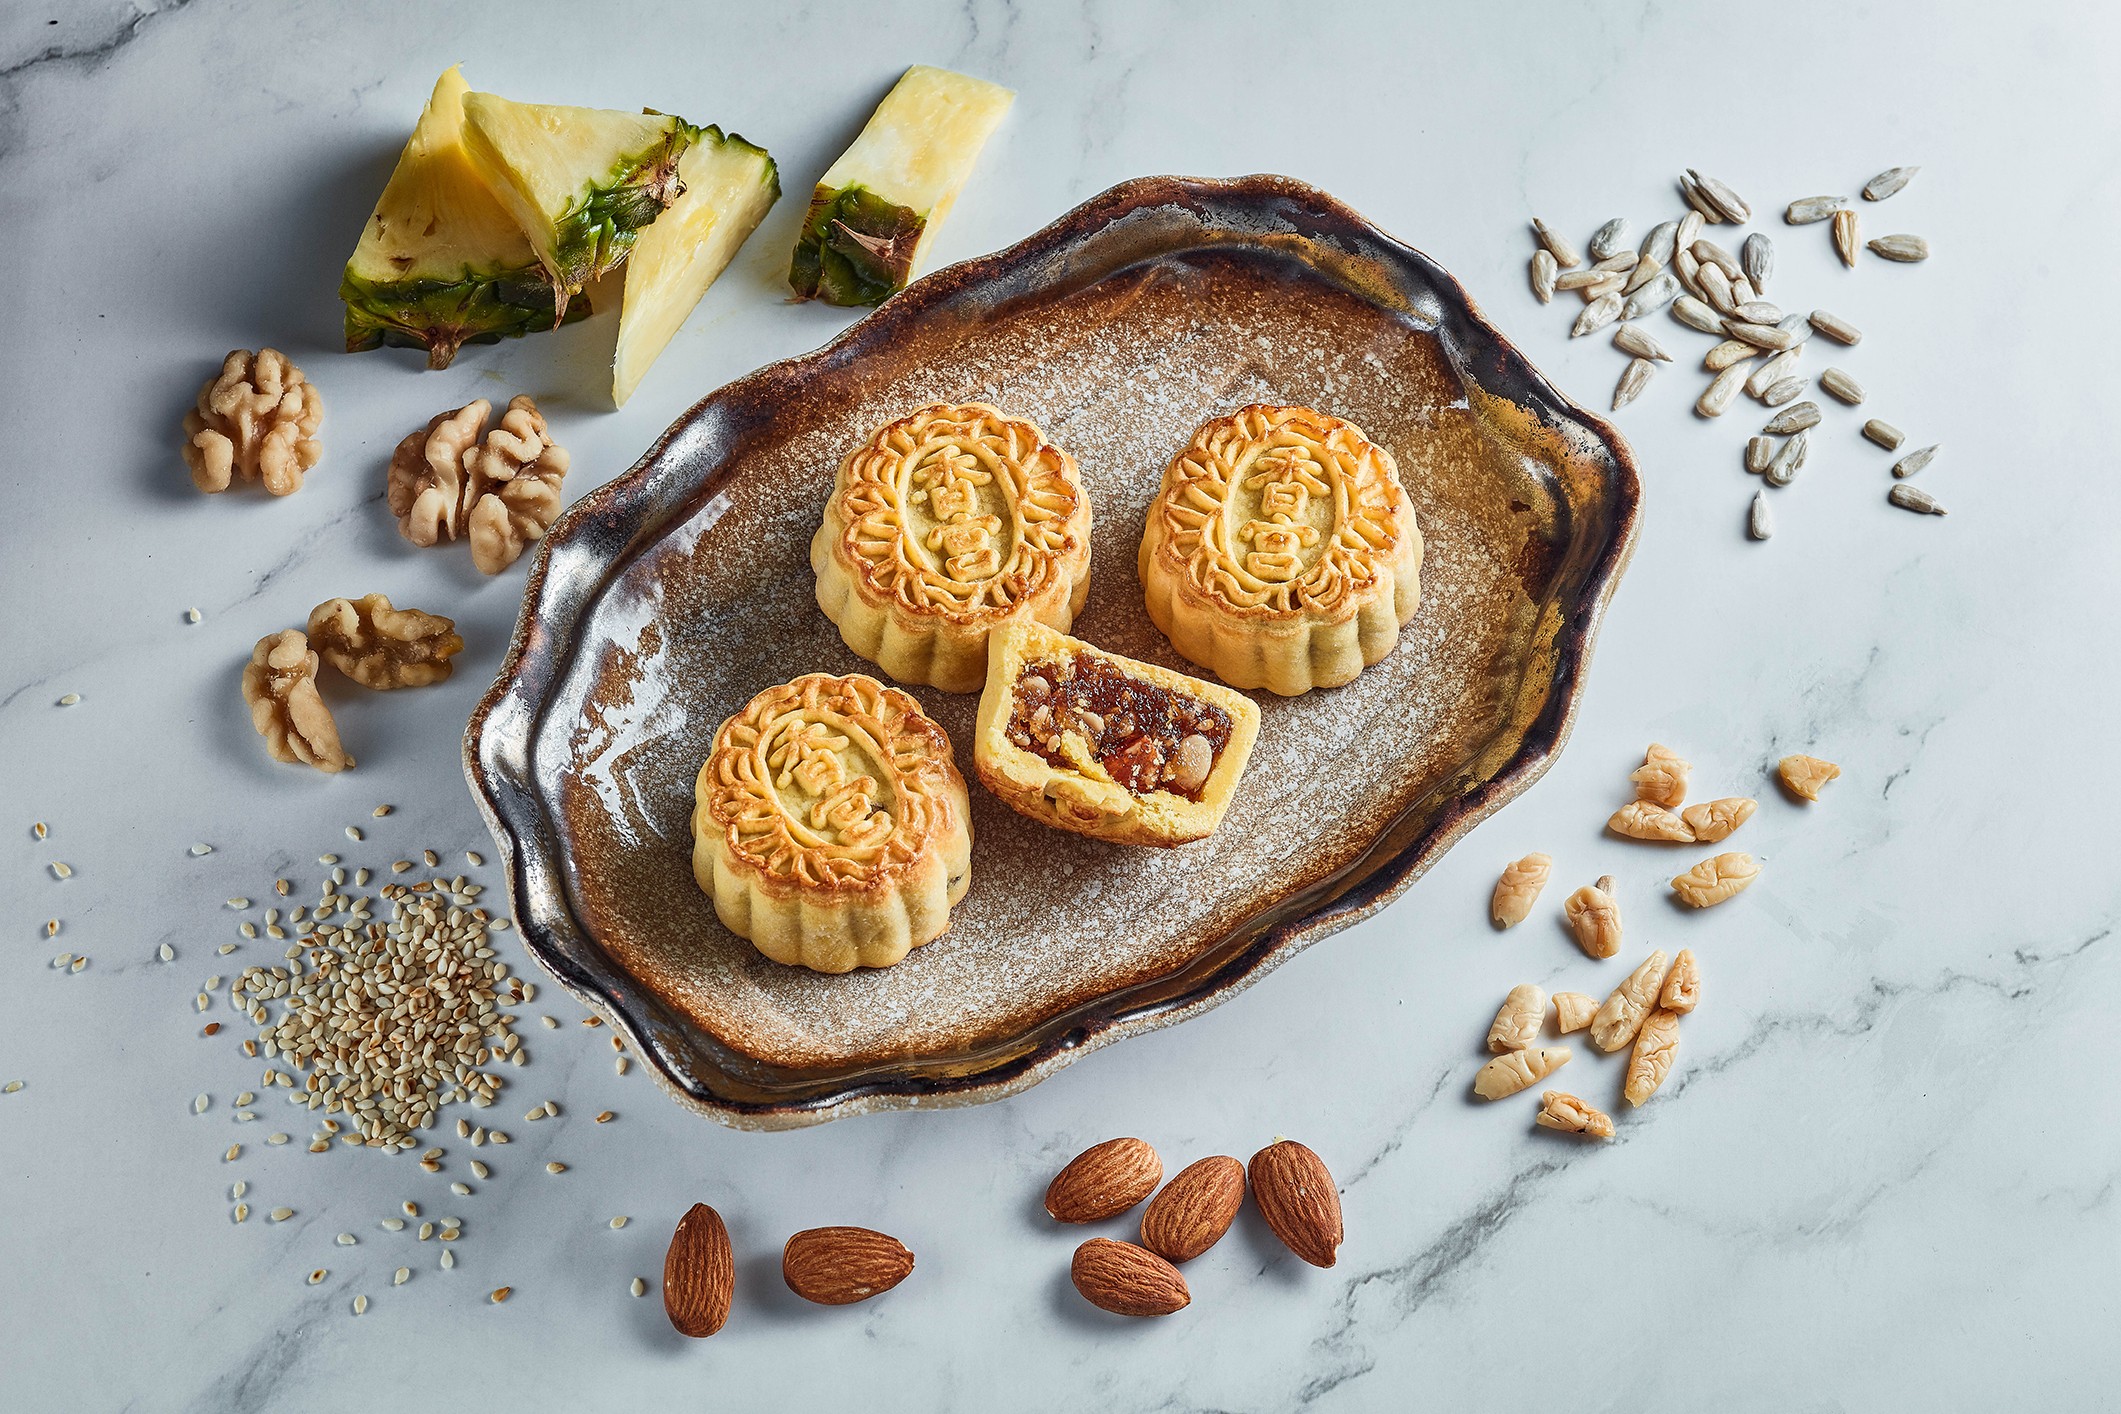 Kowloon Shangri-La offers Mini pineapple paste and five-seed mooncakes during the Mid-Autumn Festival.